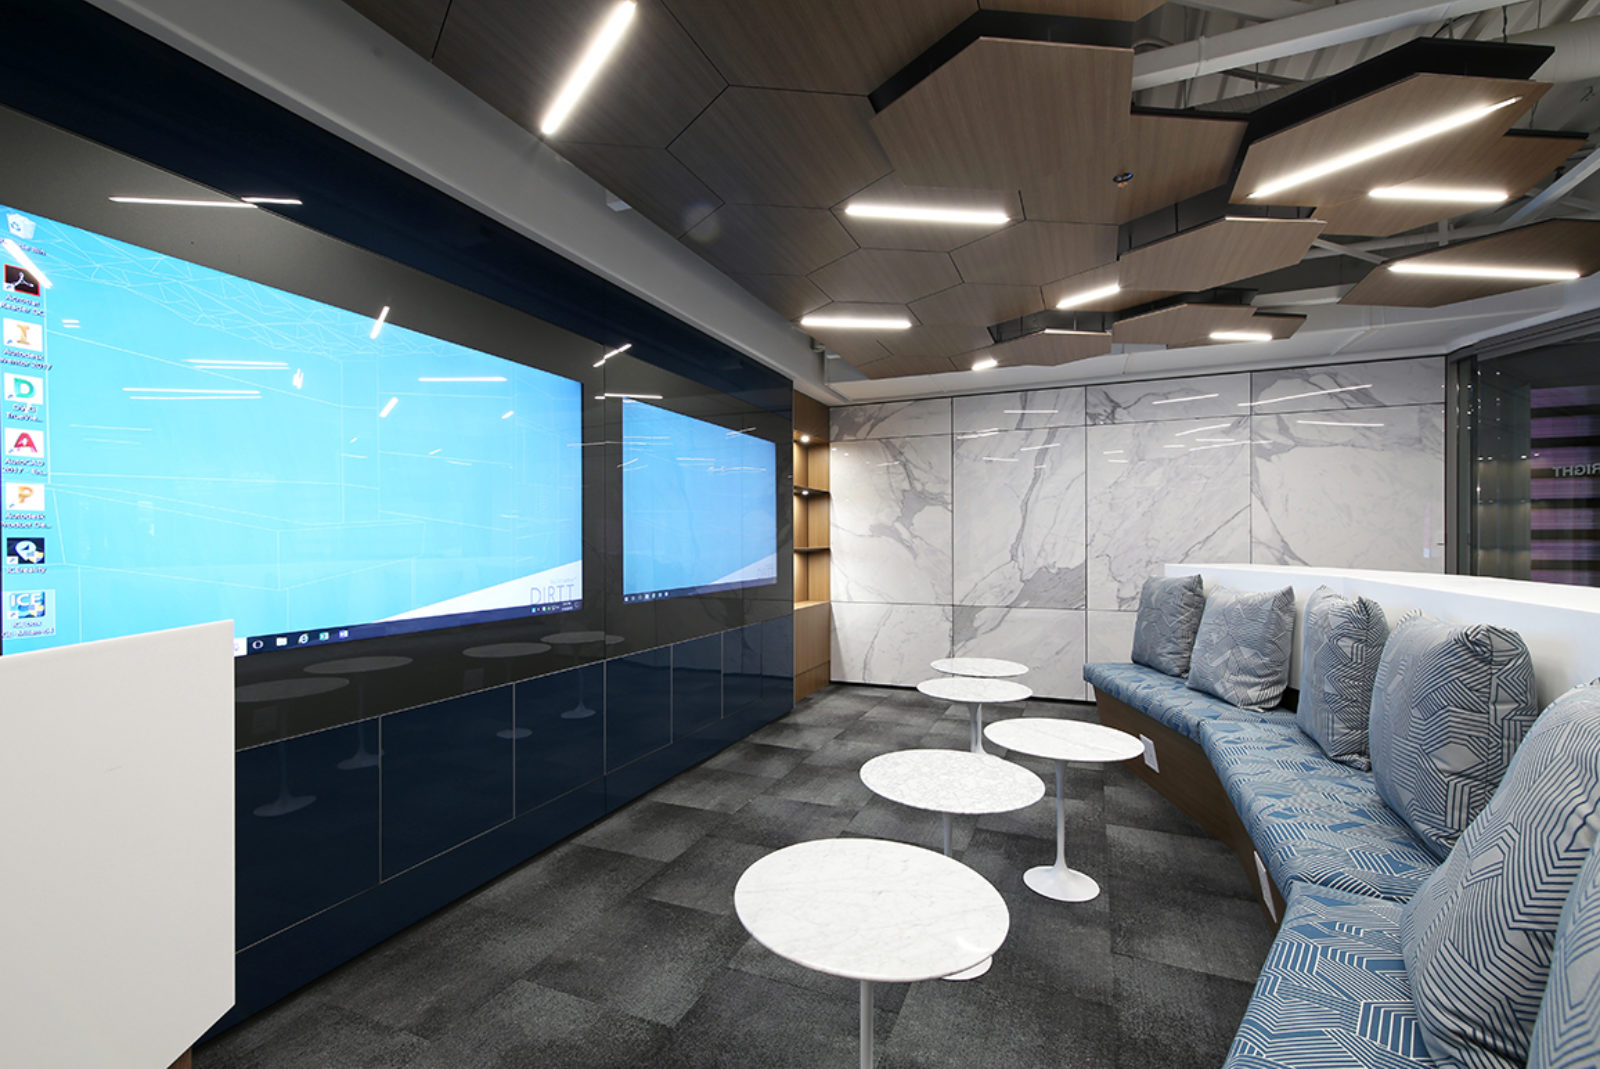 Collaborative space with DIRTT walls with integrated screens and technology, DIRTT ceilings and wall panels